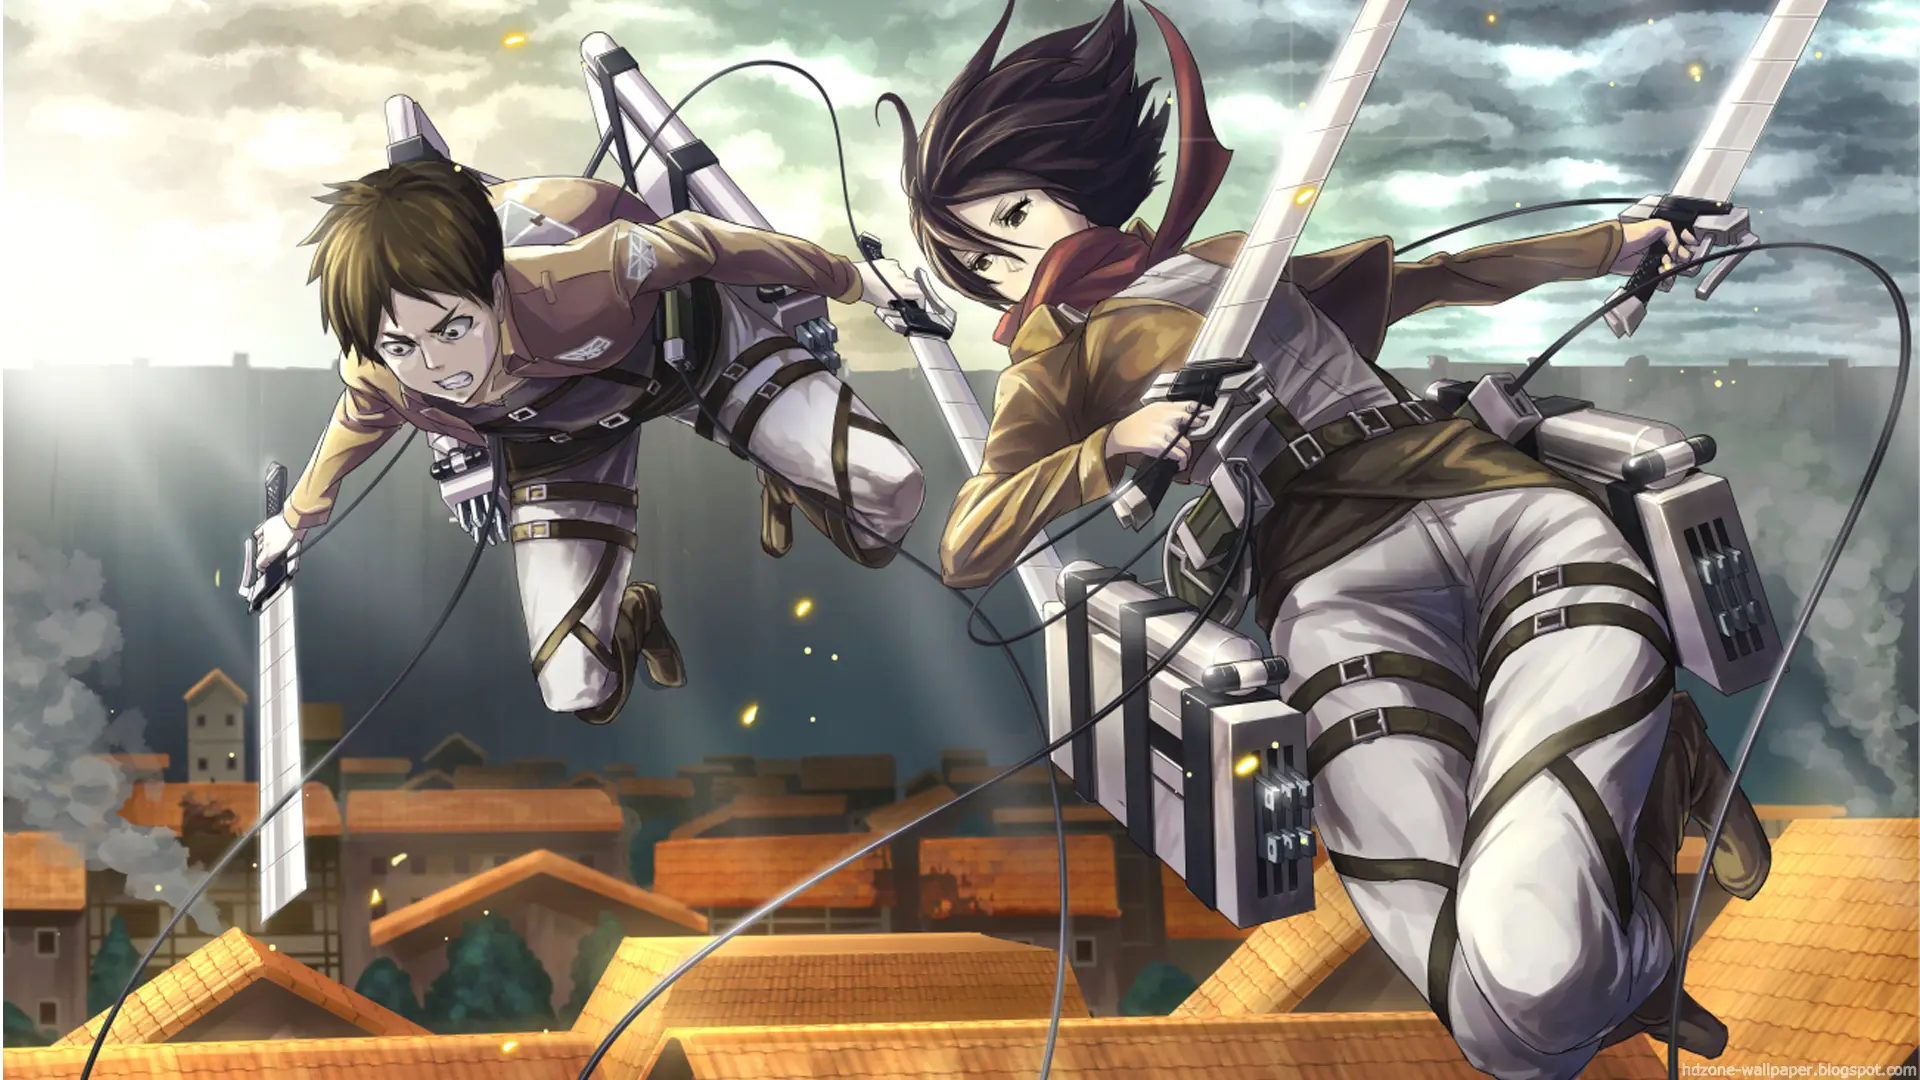 Anime Attack on Titan wallpaper 2 | Background Image